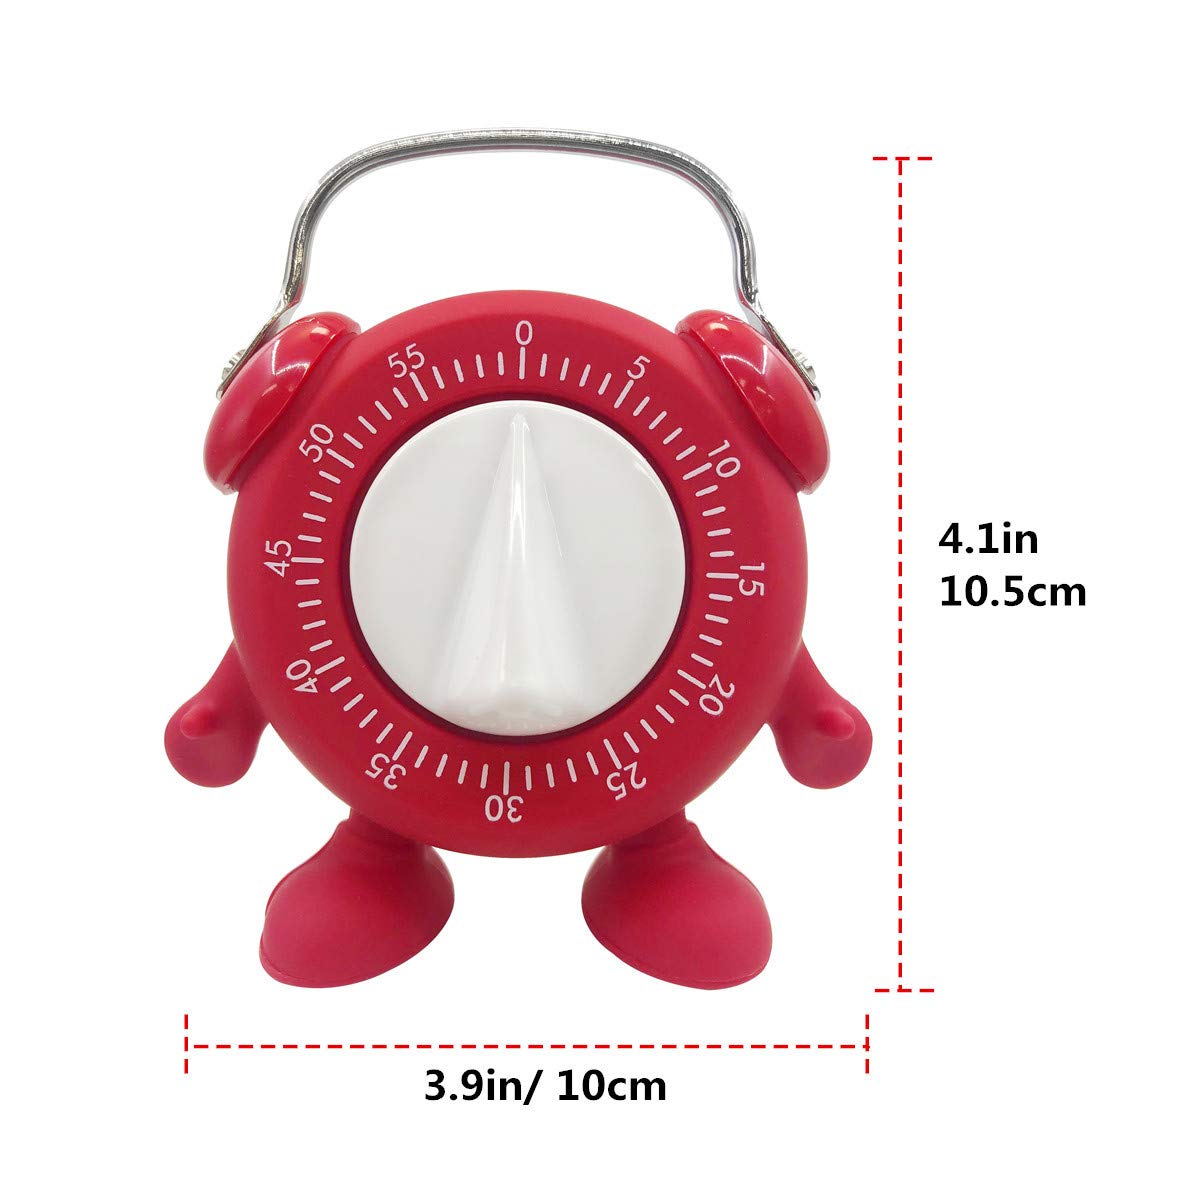 Keleely Kitchen Timer, for Baking Teaching Cooking Egg Potty Training Cute 60 Mins Twist Wind-Up Timer with Ring Alert, No Battery (Red)